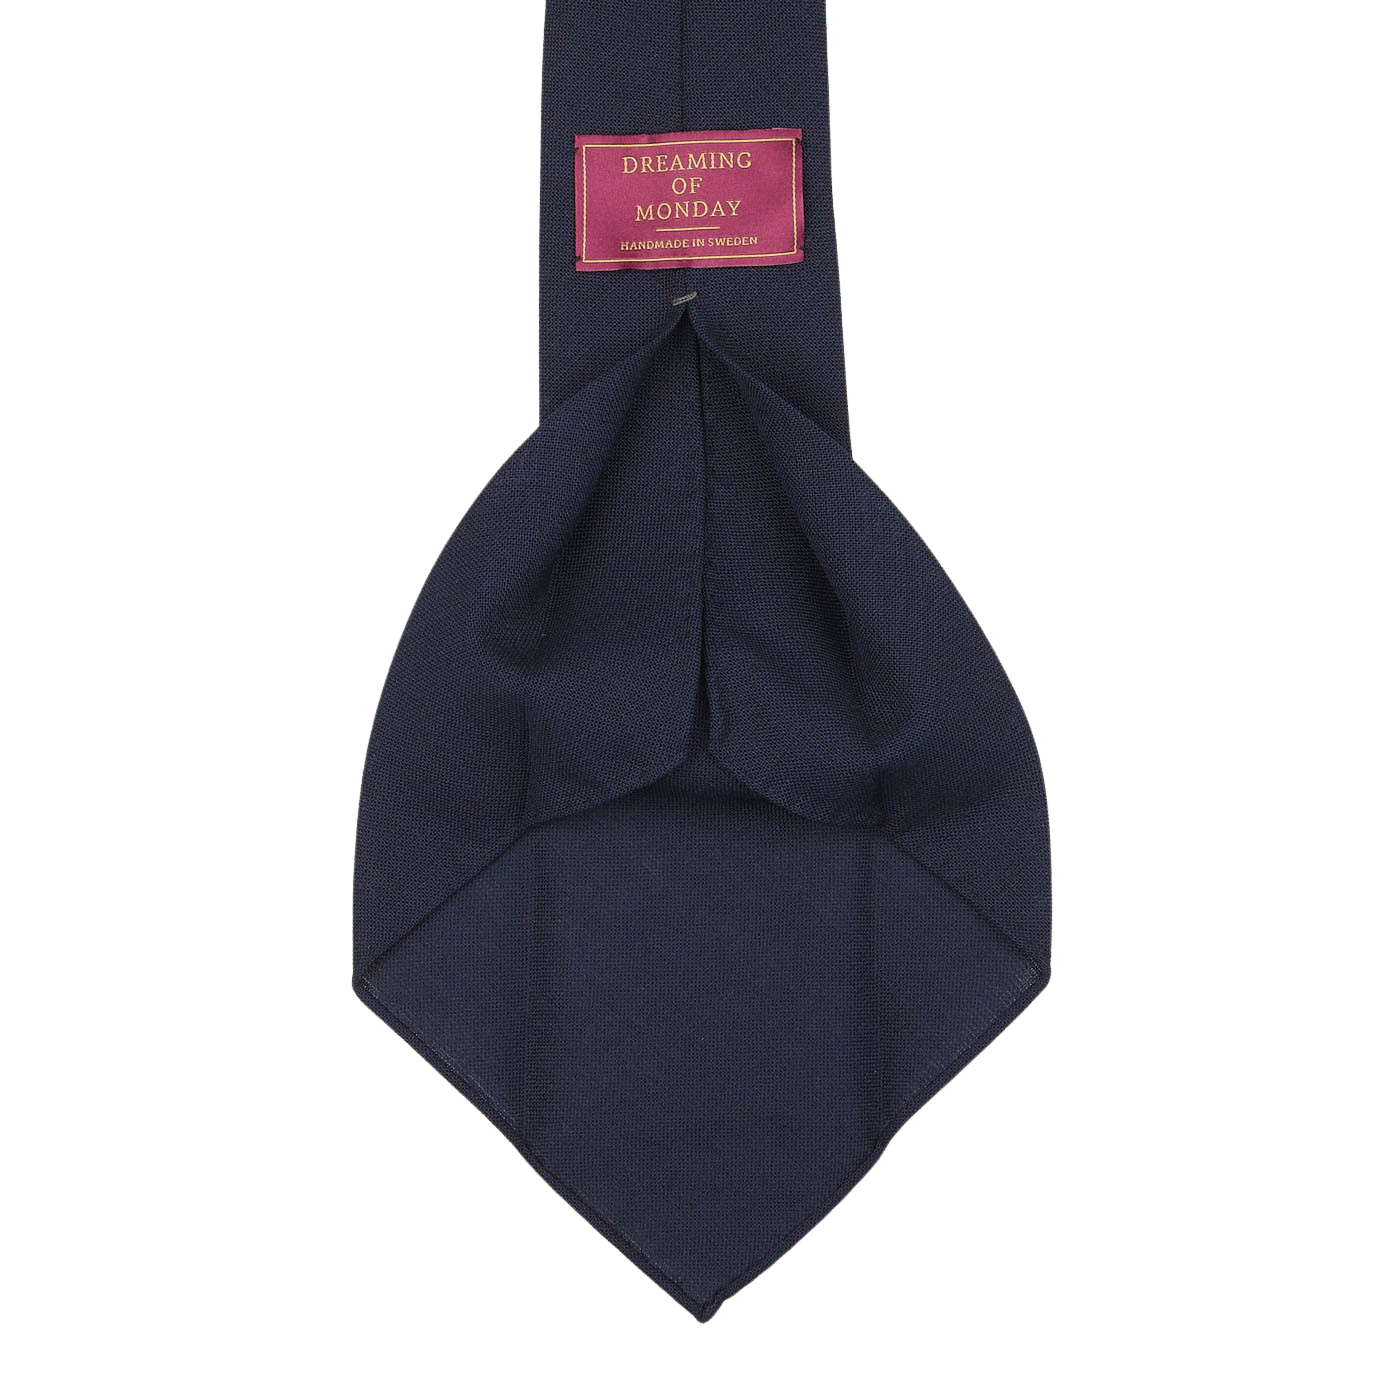 A Navy Blue Wool Fresco 7-Fold Tie labeled "Dreaming Of Monday," crafted with a luxurious pure high-twist wool and featuring an elegant 7-fold construction, displayed against a plain white background.